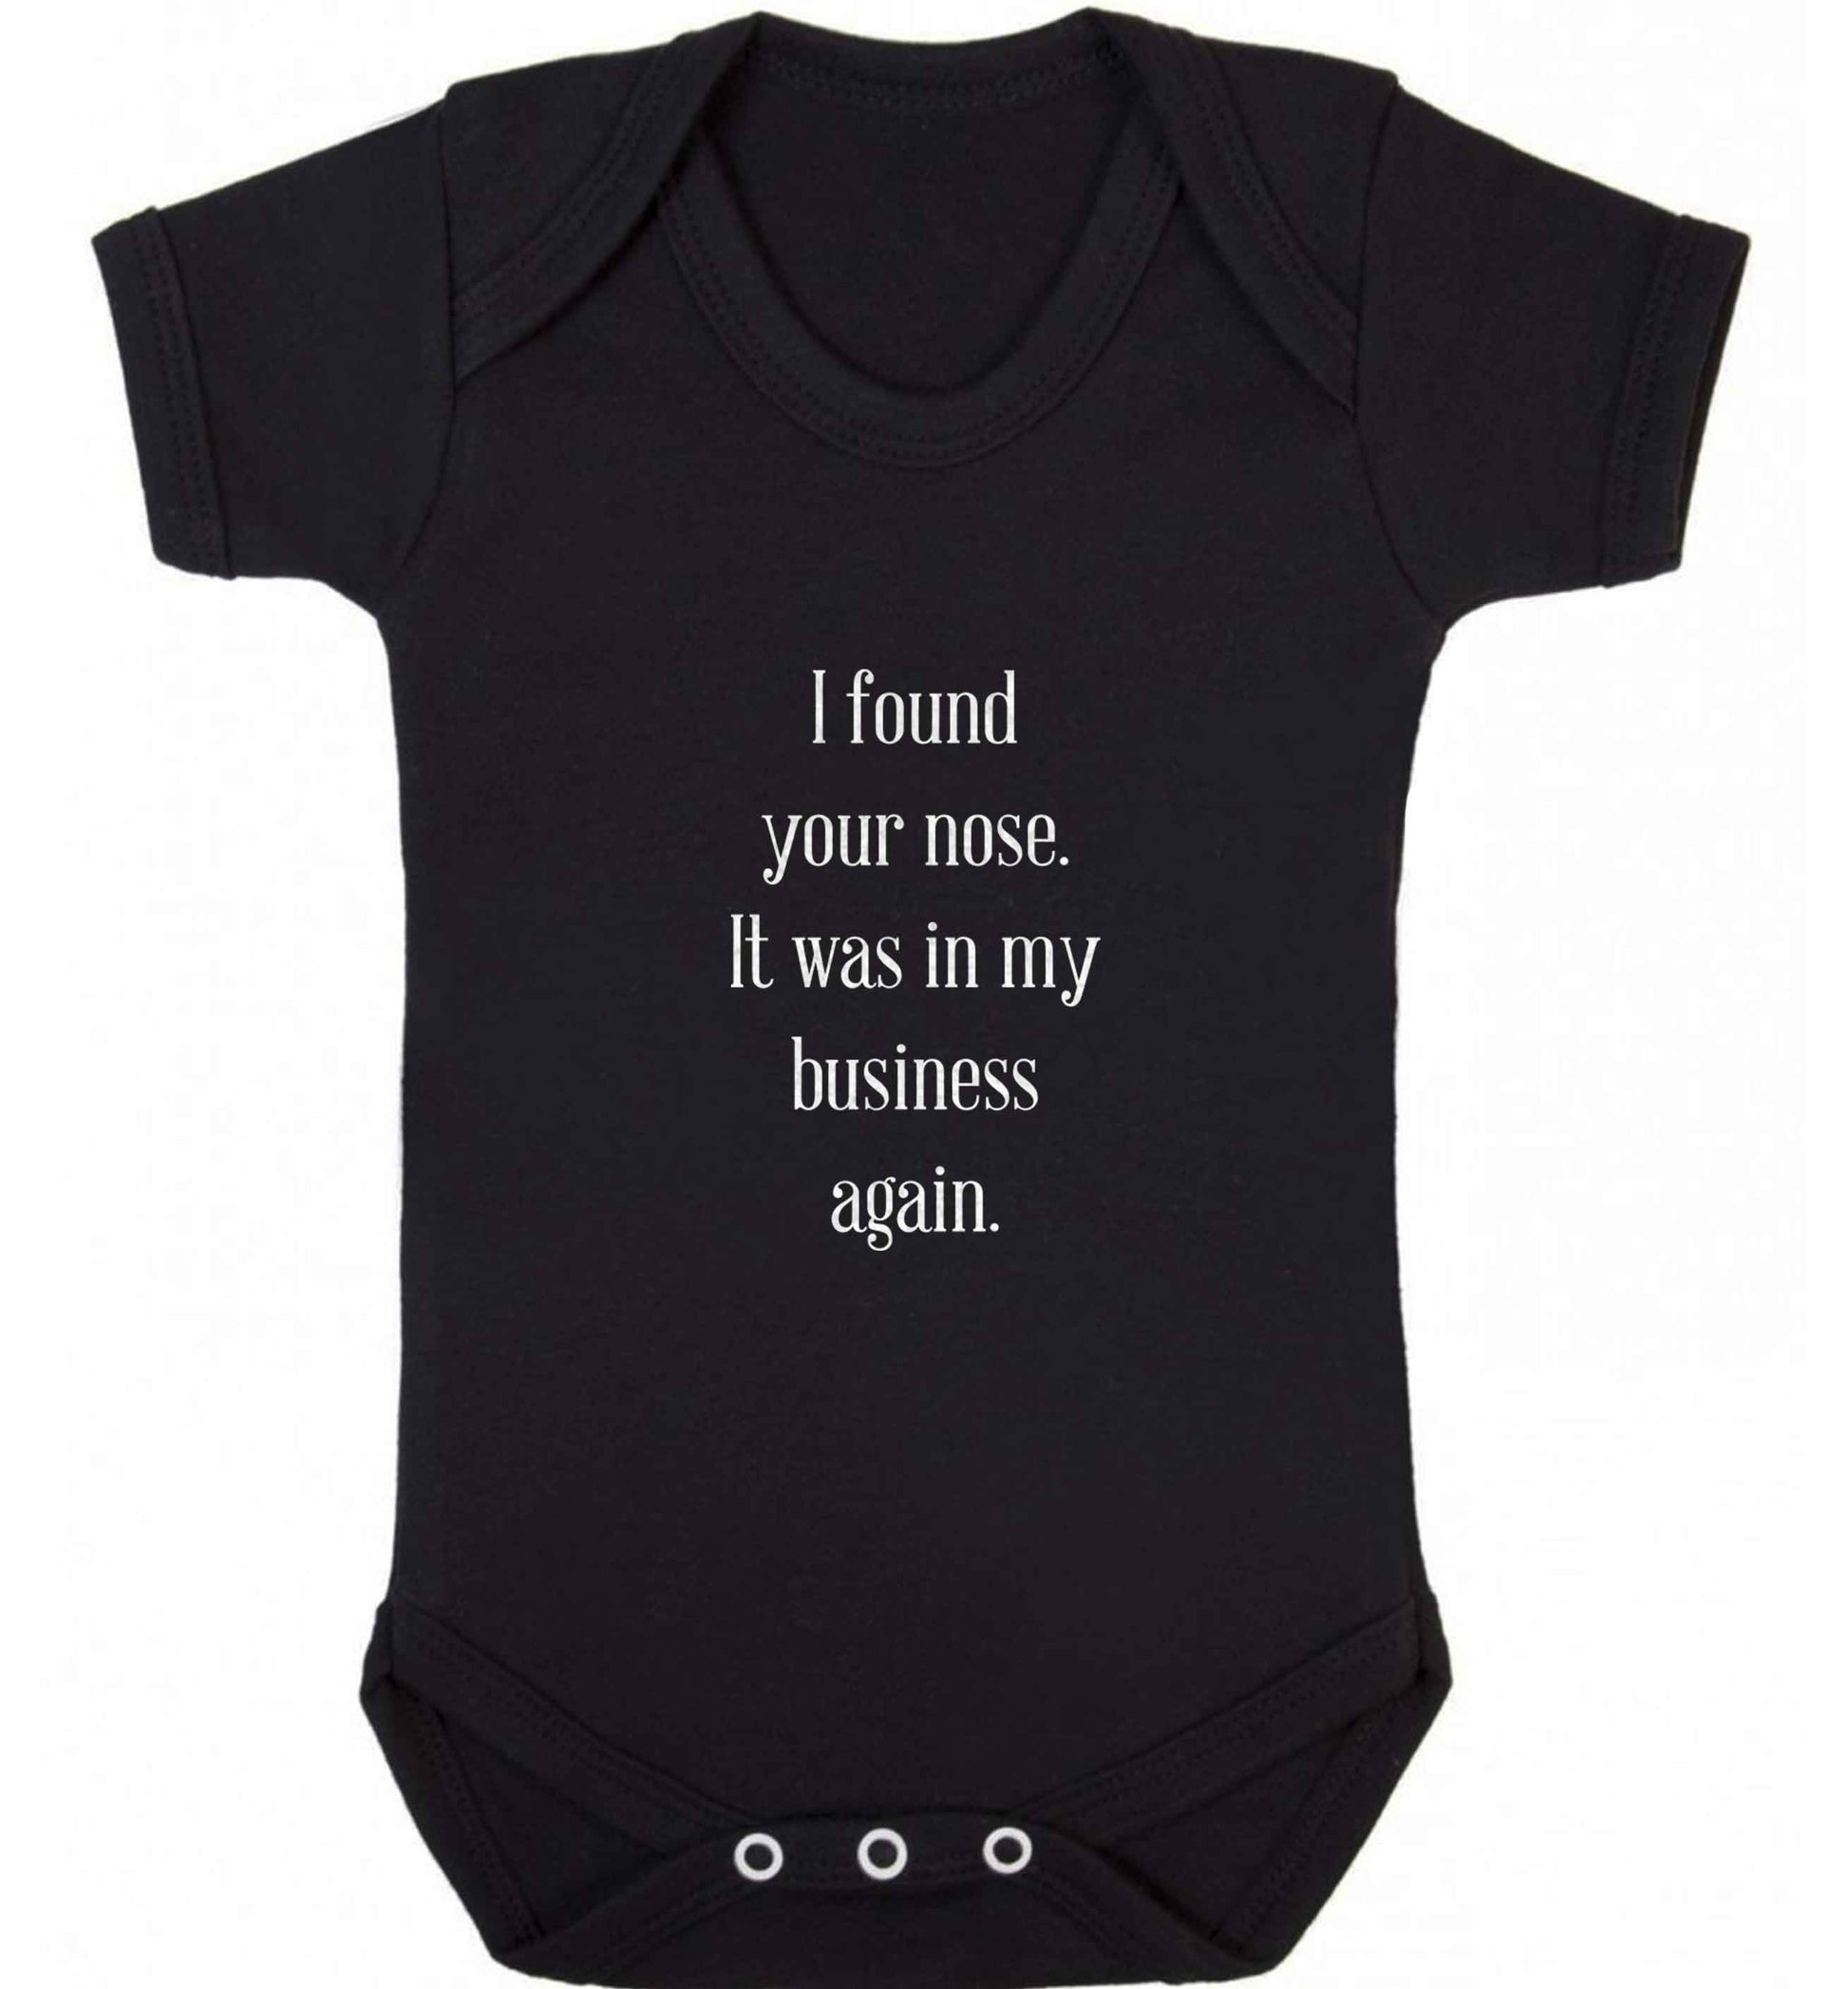 I found your nose it was in my business again baby vest black 18-24 months